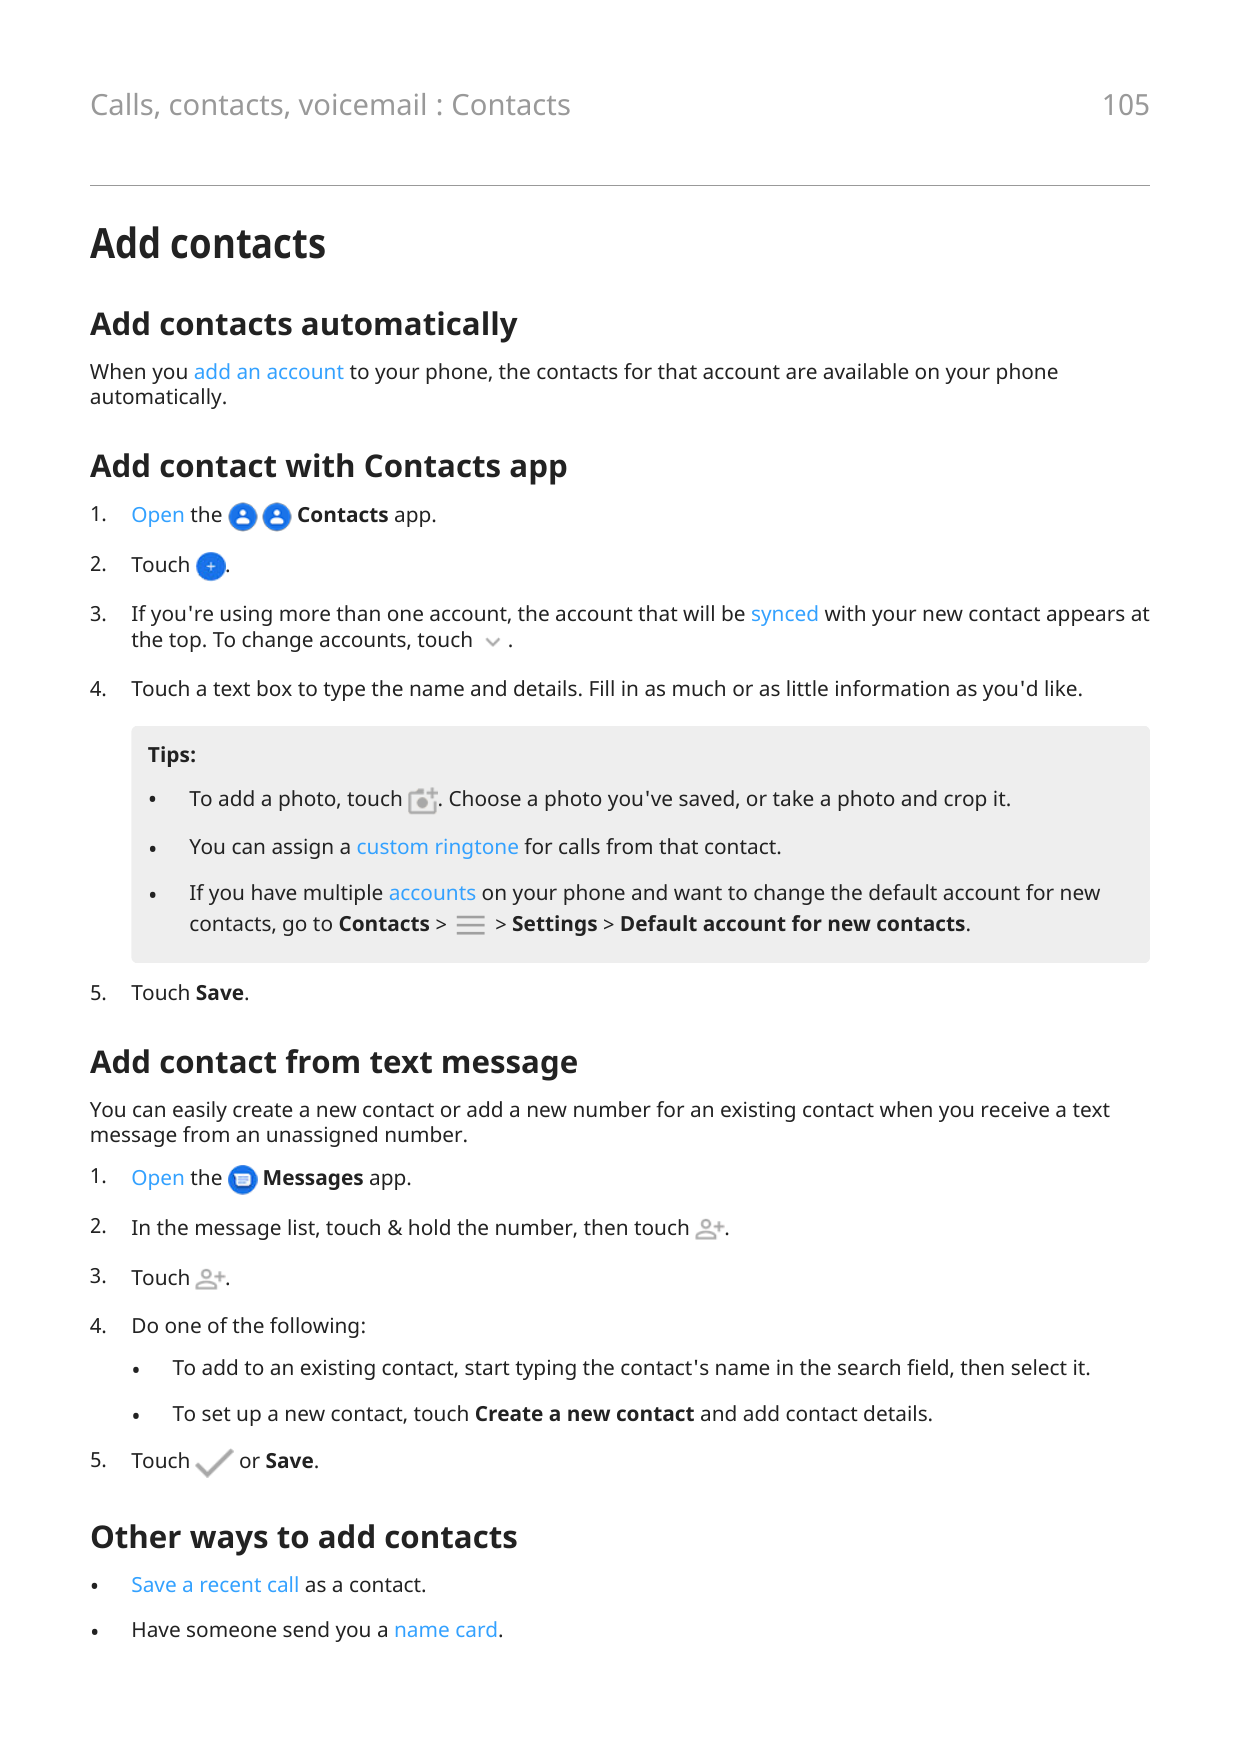 105Calls, contacts, voicemail : ContactsAdd contactsAdd contacts automaticallyWhen you add an account to your phone, the contact